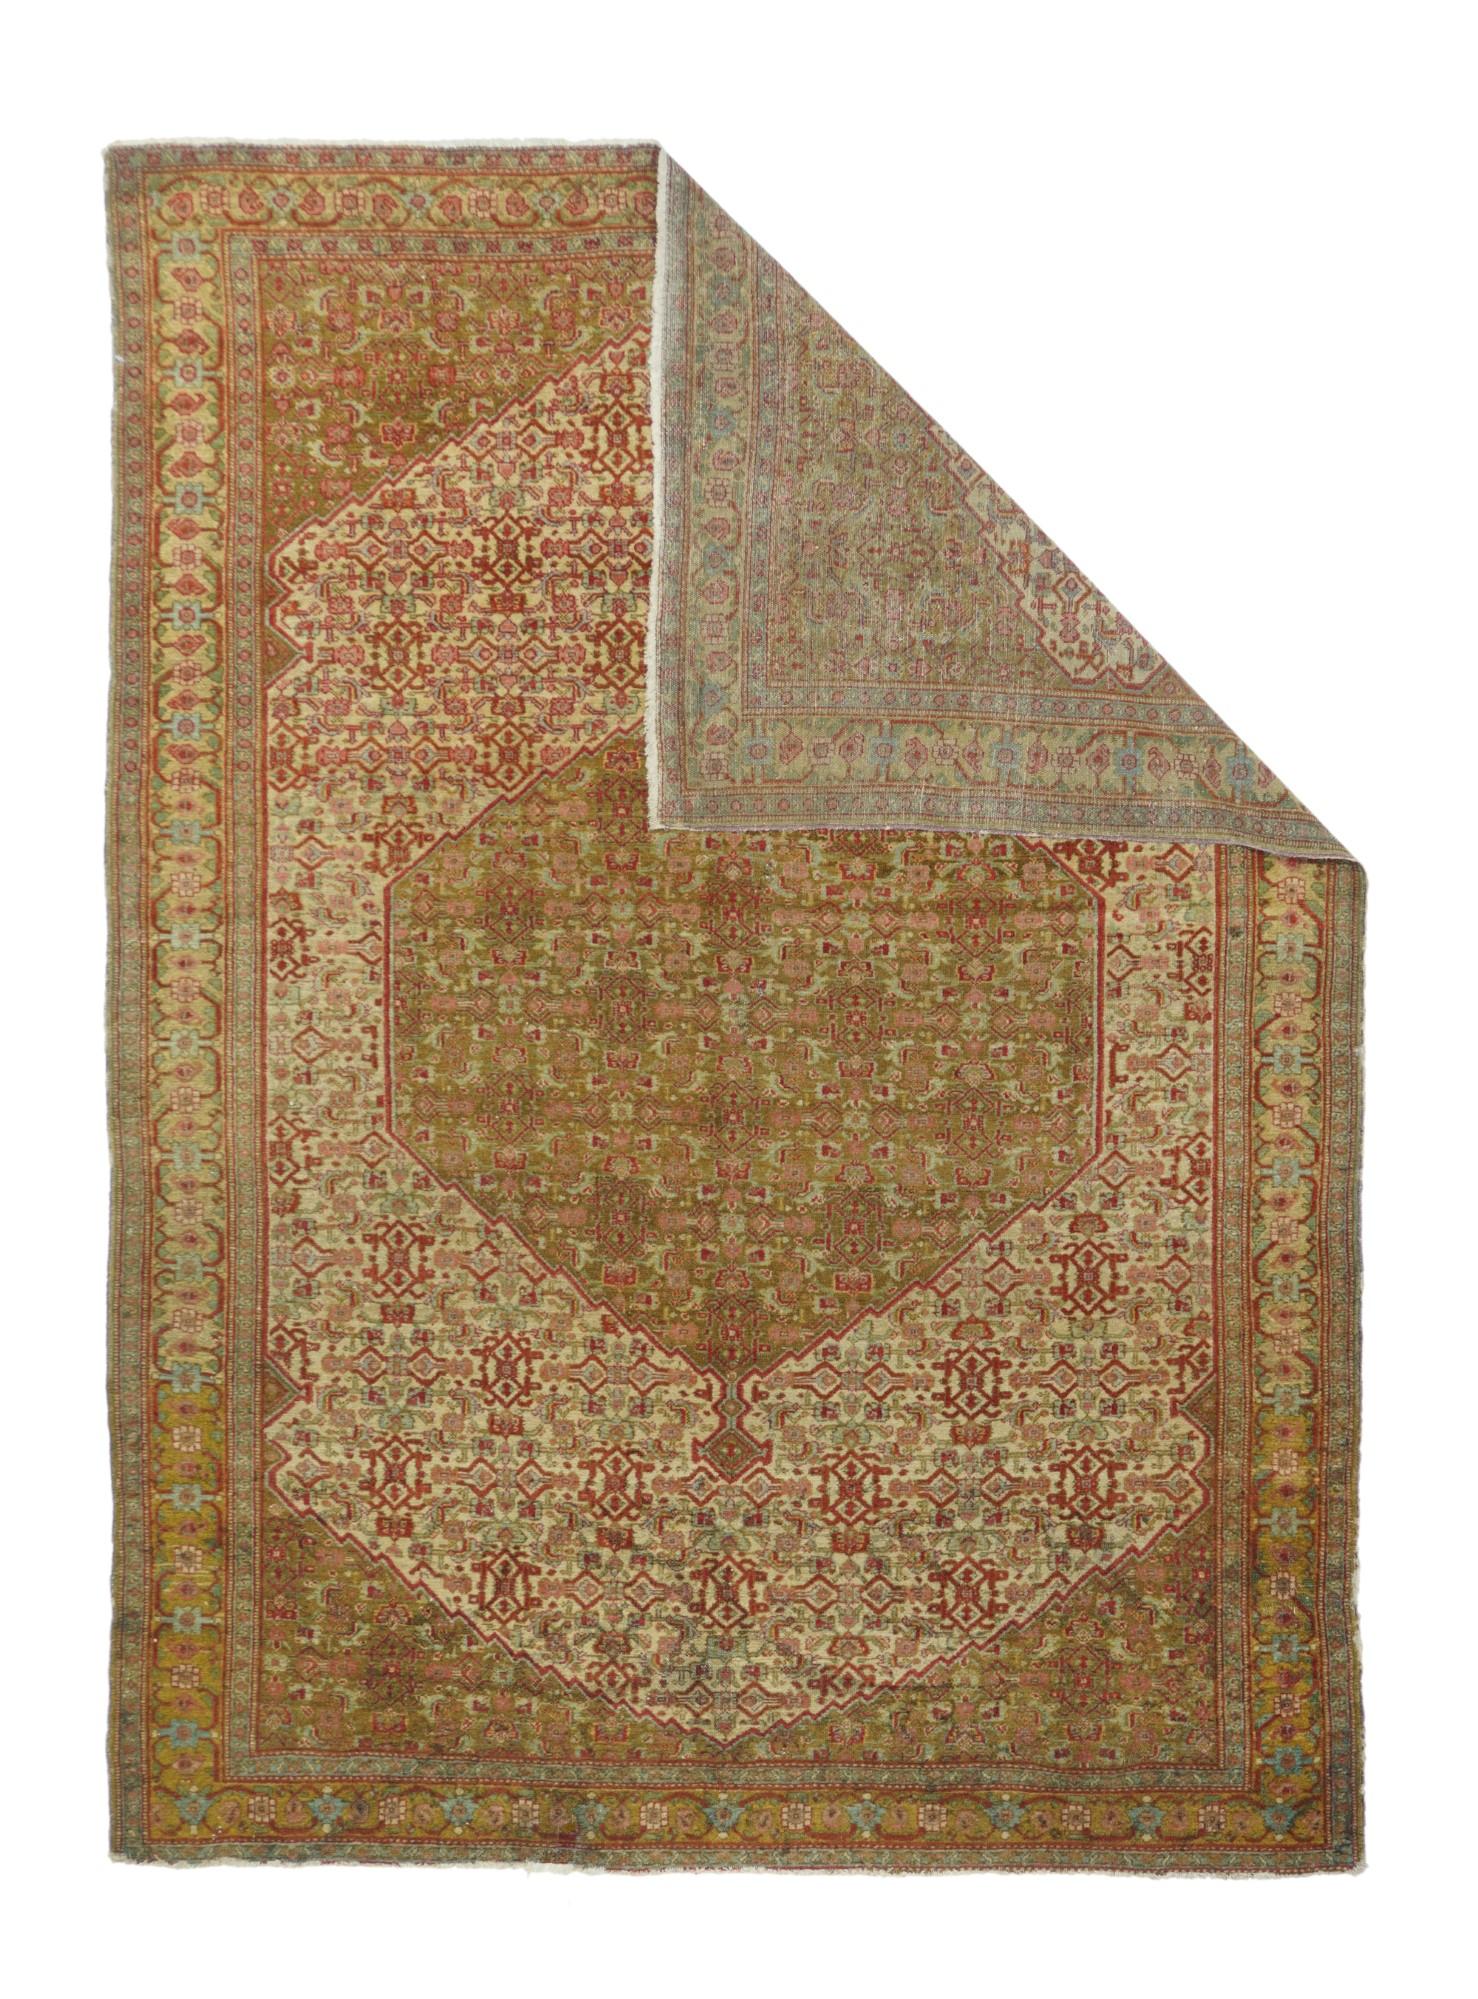 A uniform Herati design, varying only in color distribution, covers the hexagonal medallion, triangular corners and sandy-straw field of this well-woven western Persian Kurdish town rug from the seat of Kurdistan province, Sanandaj. The straw main